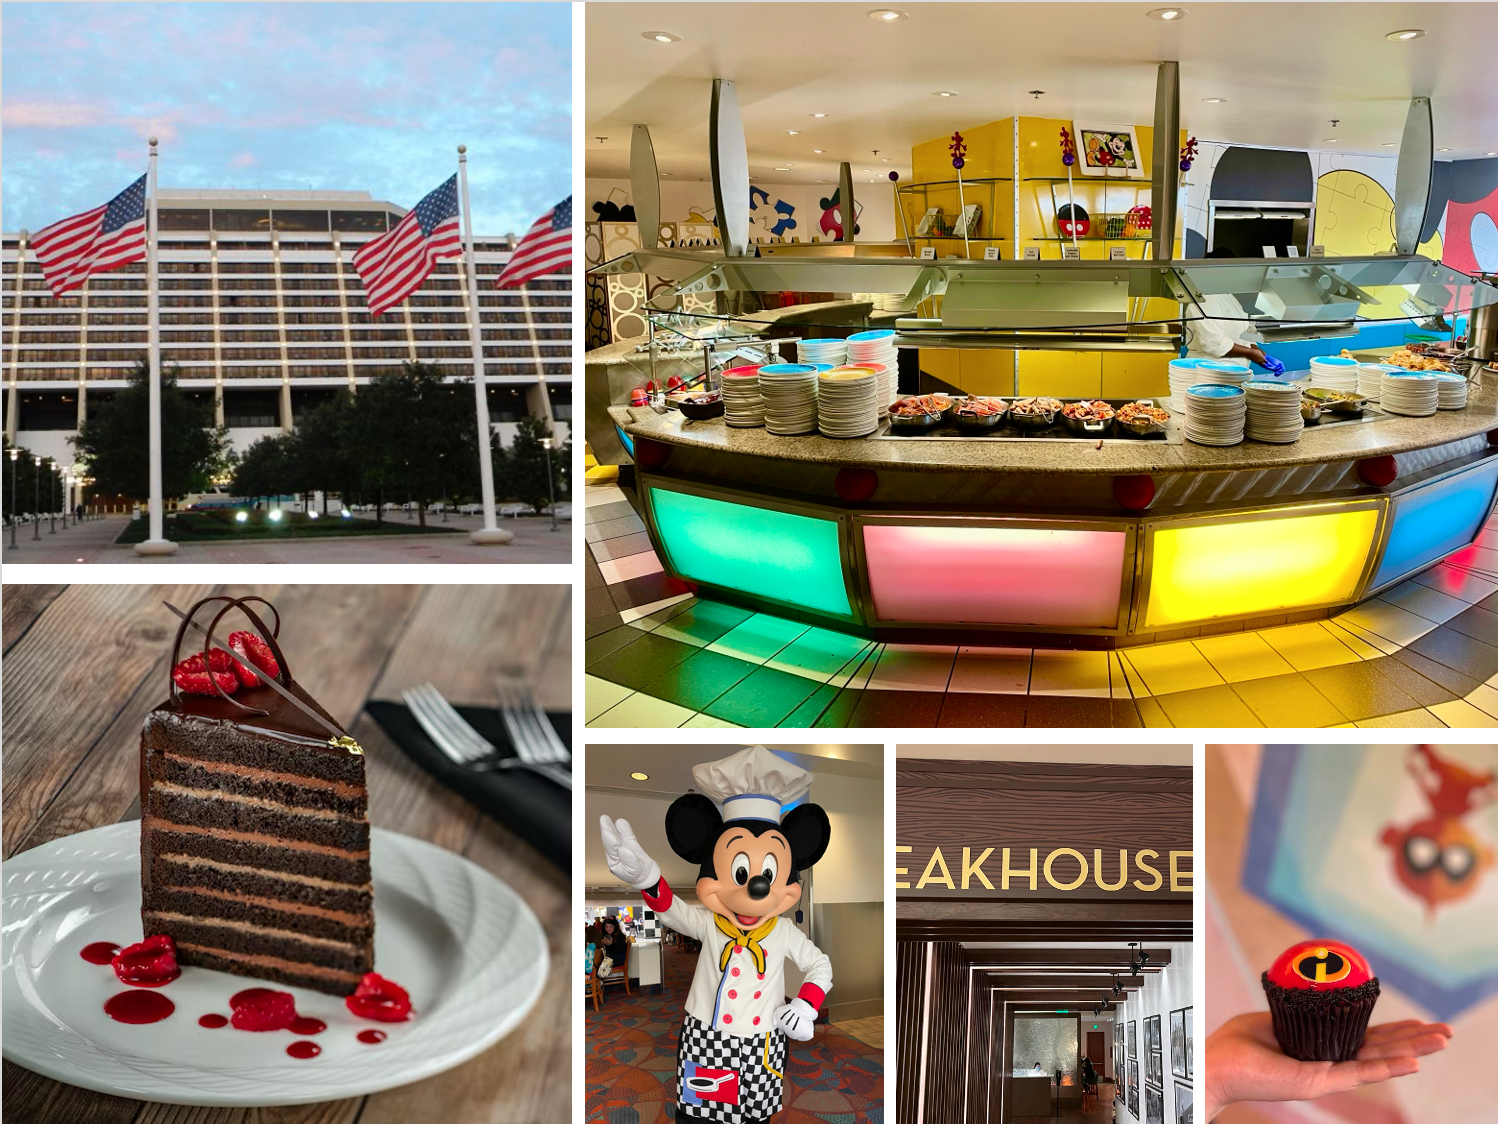 Better Magic Kingdom Dining Choices at Disney’s Contemporary Resort